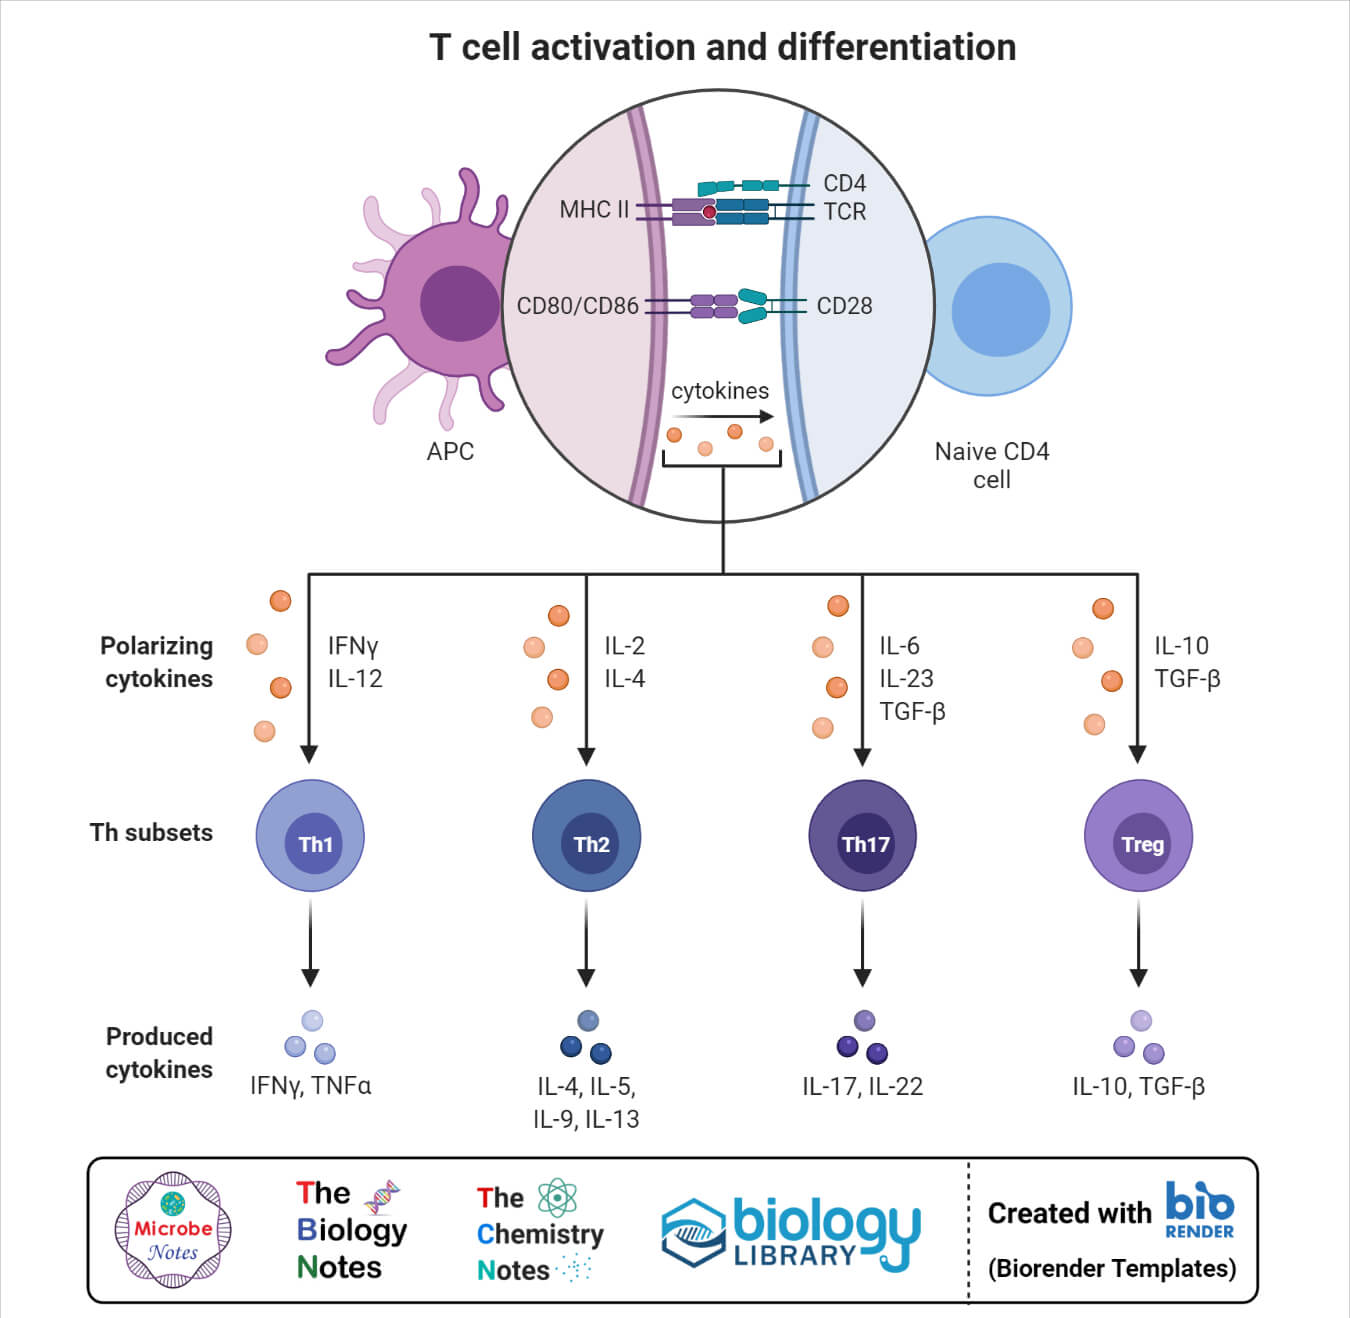 T cell activation and differentiation